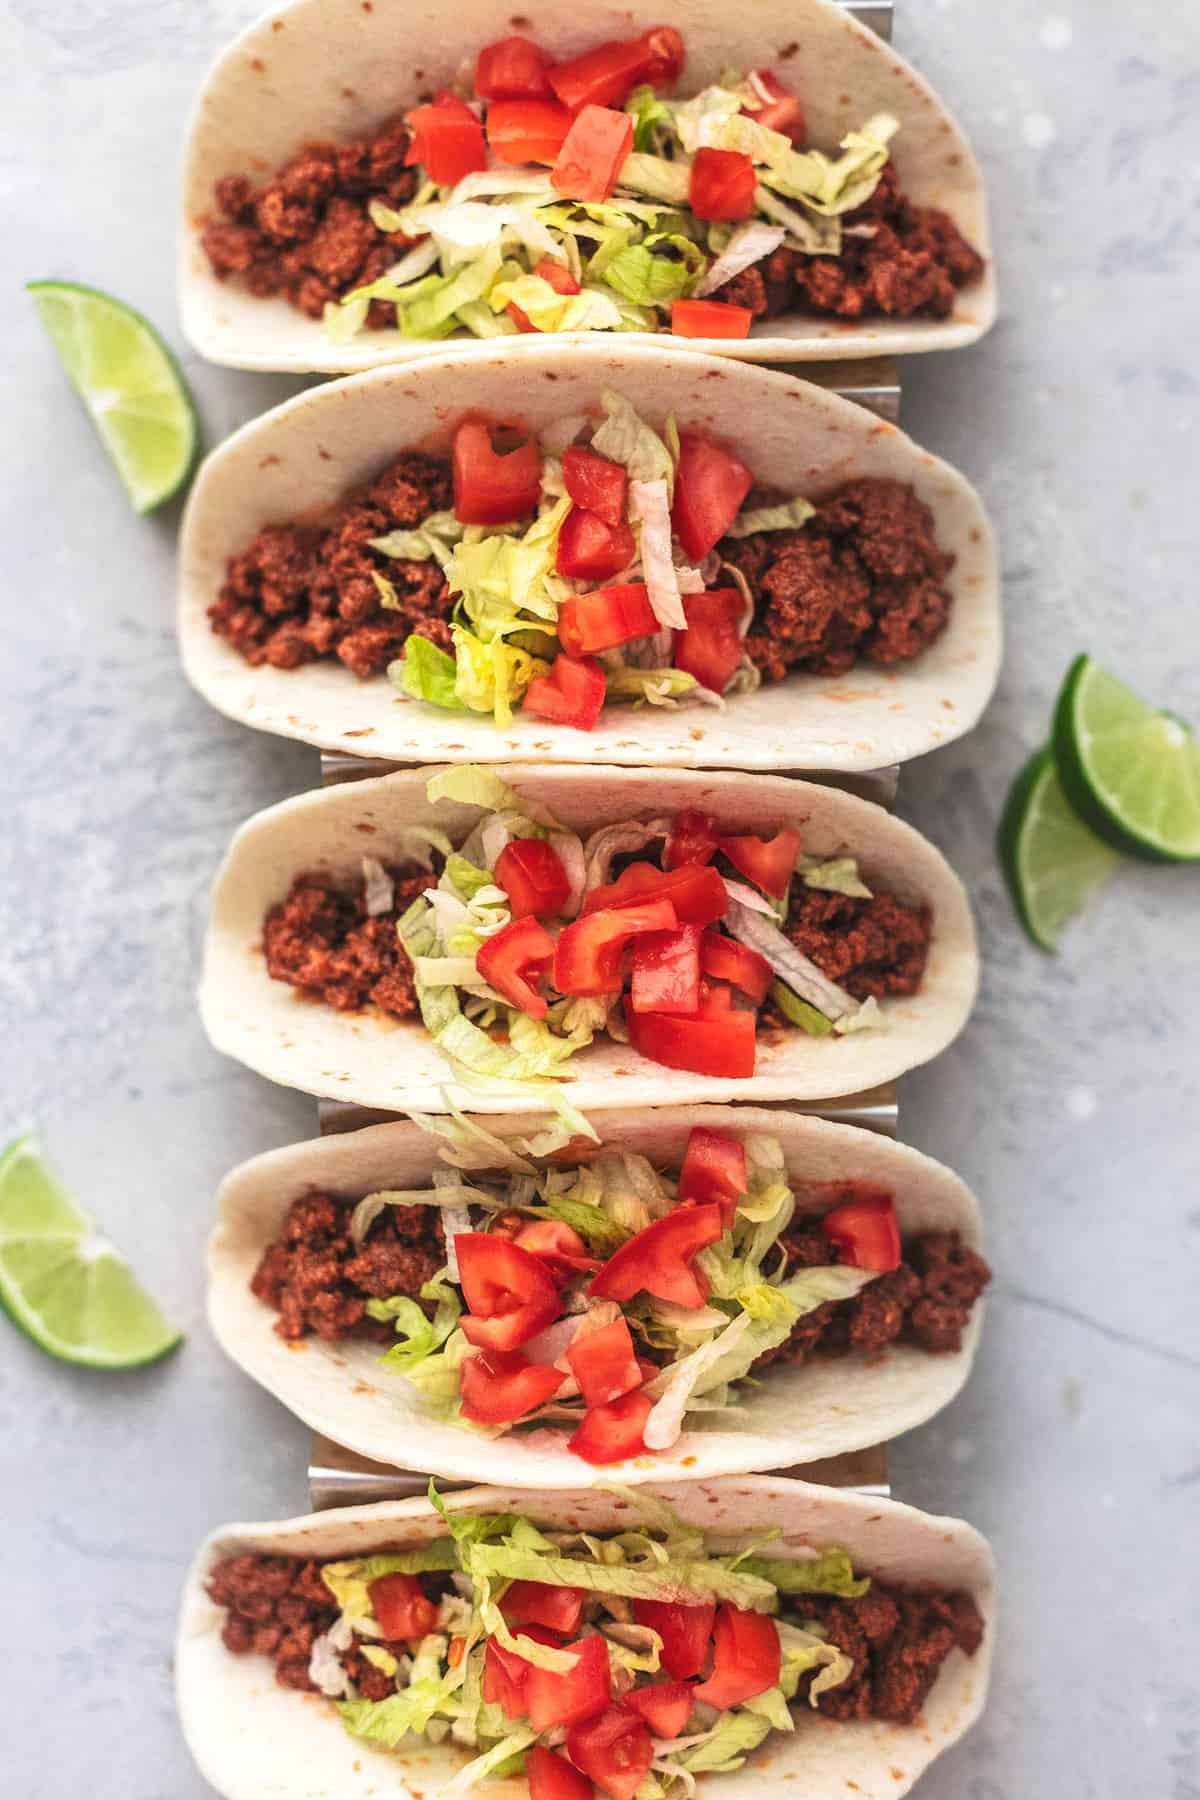 top view of ground beef tacos with toppings on them in a taco holder with lime slices on the side.